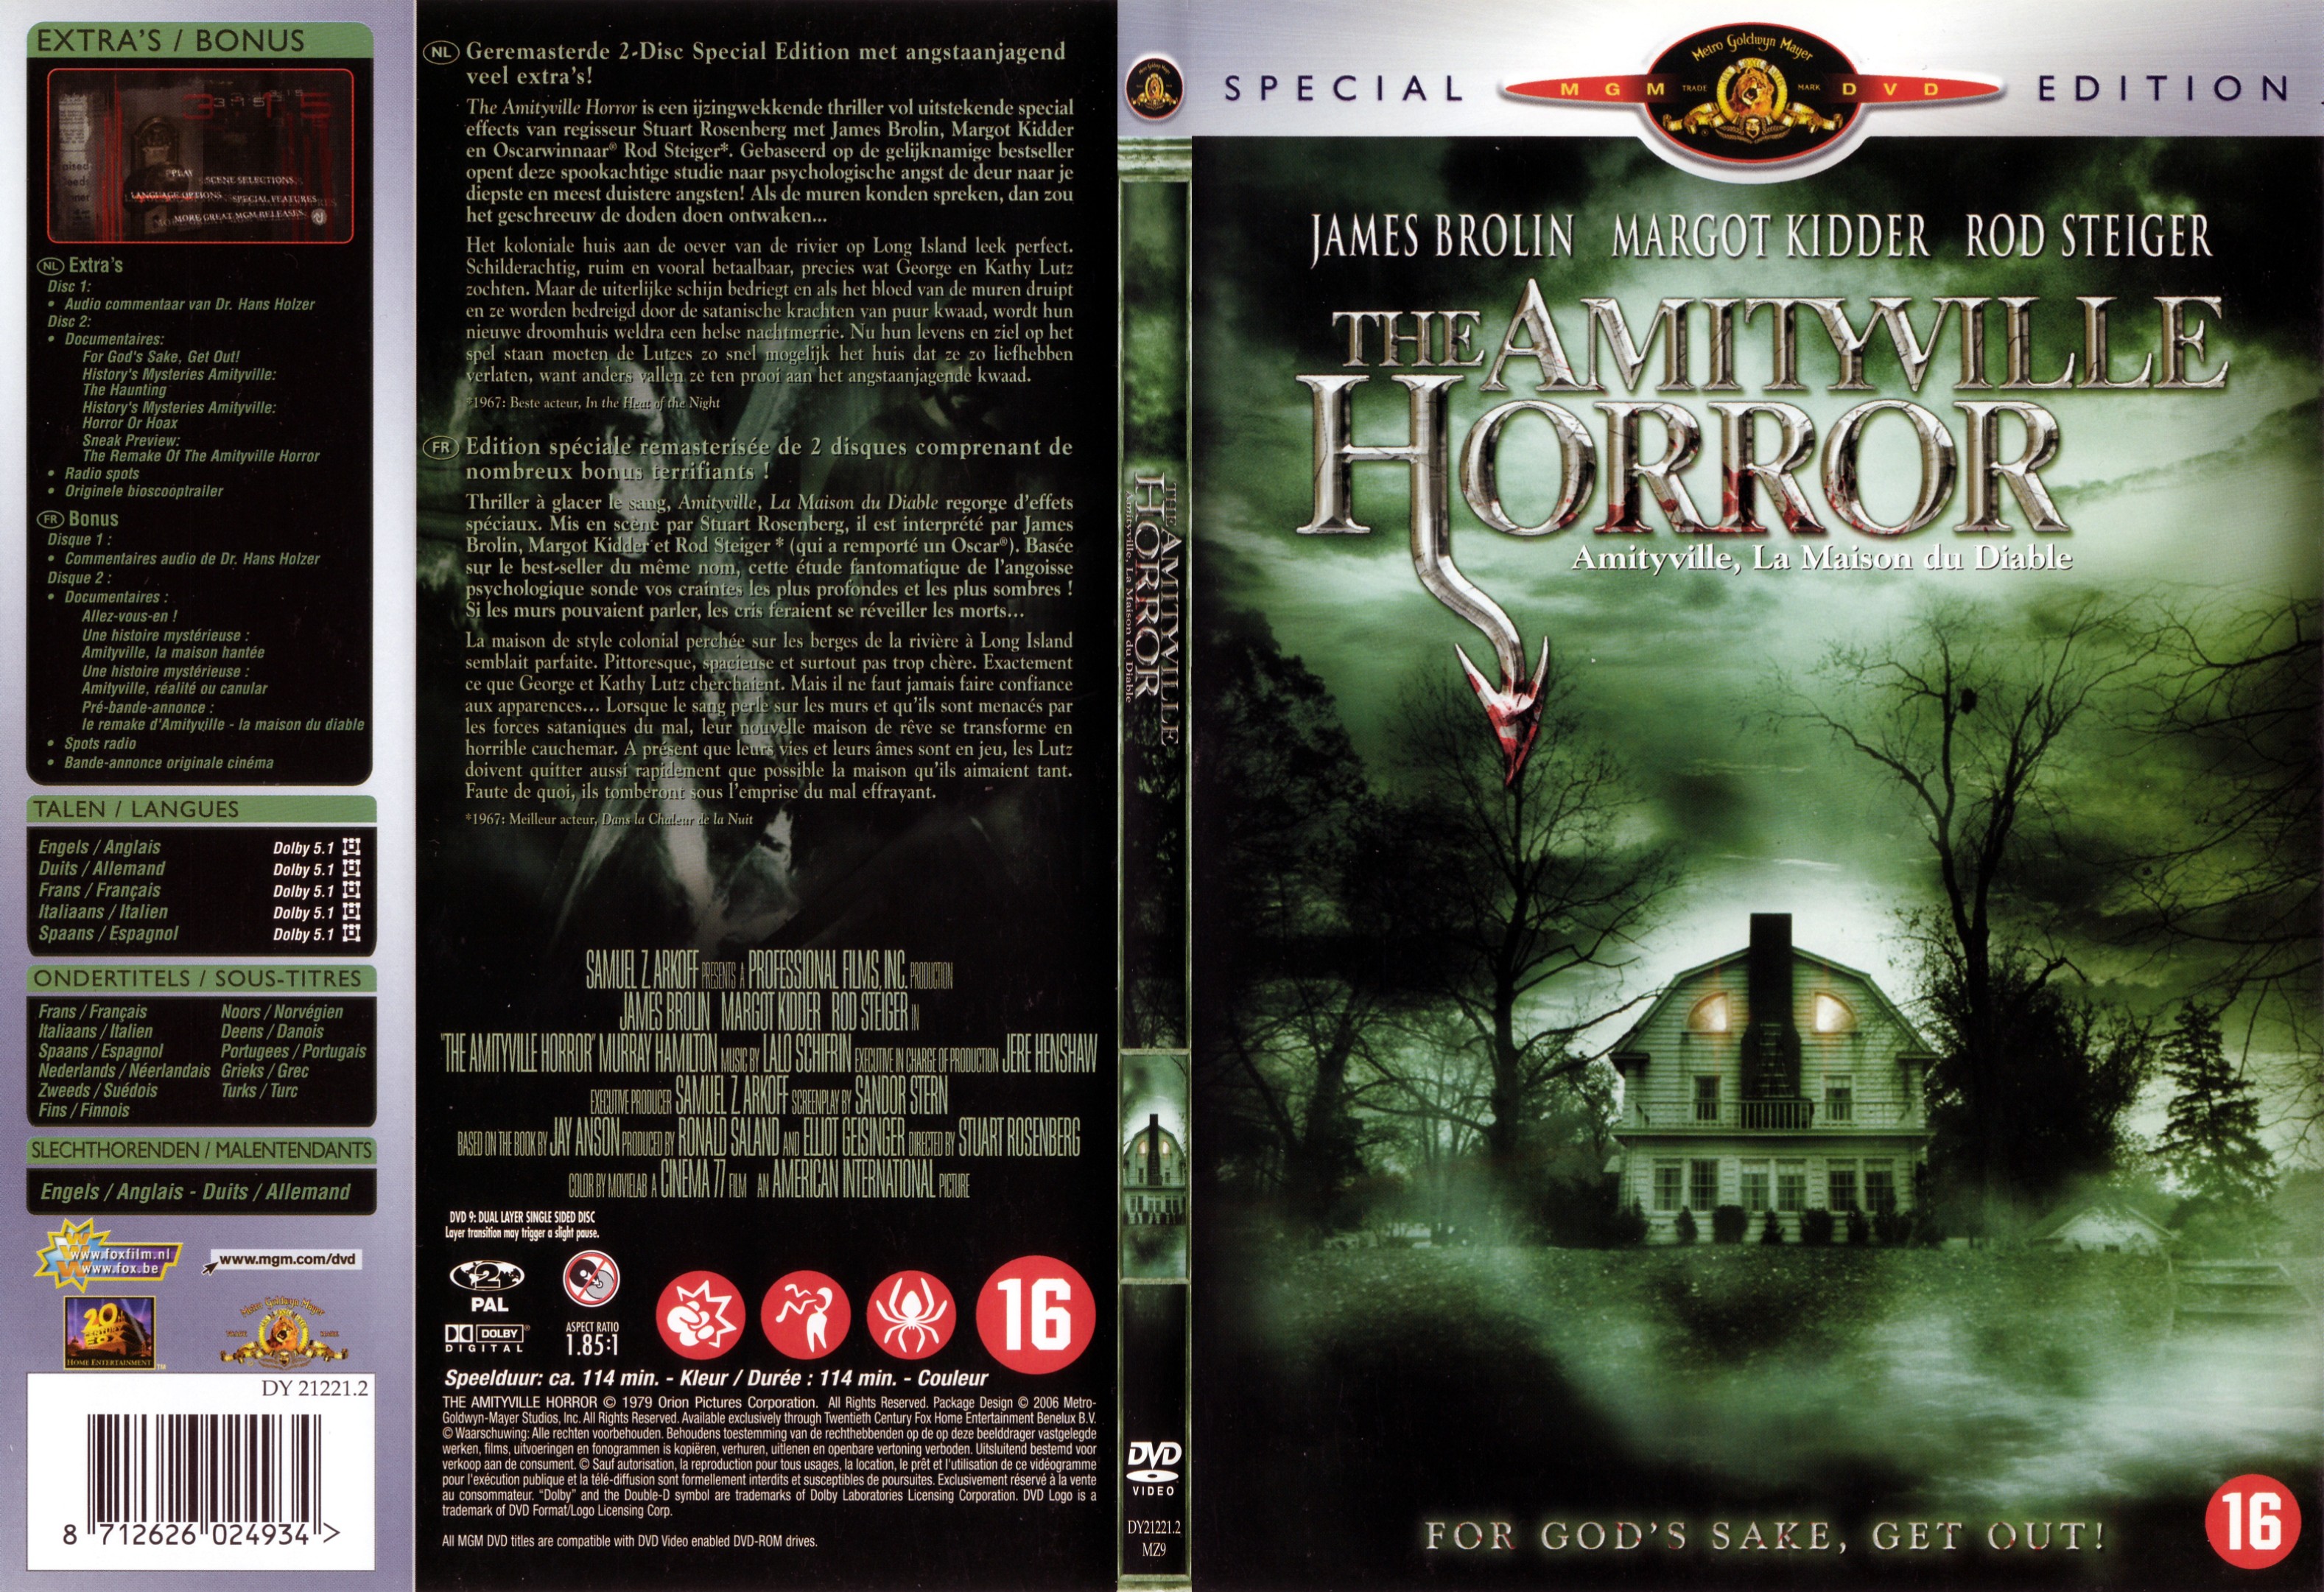 Jaquette DVD The Amityville horror (1979) - SLIM